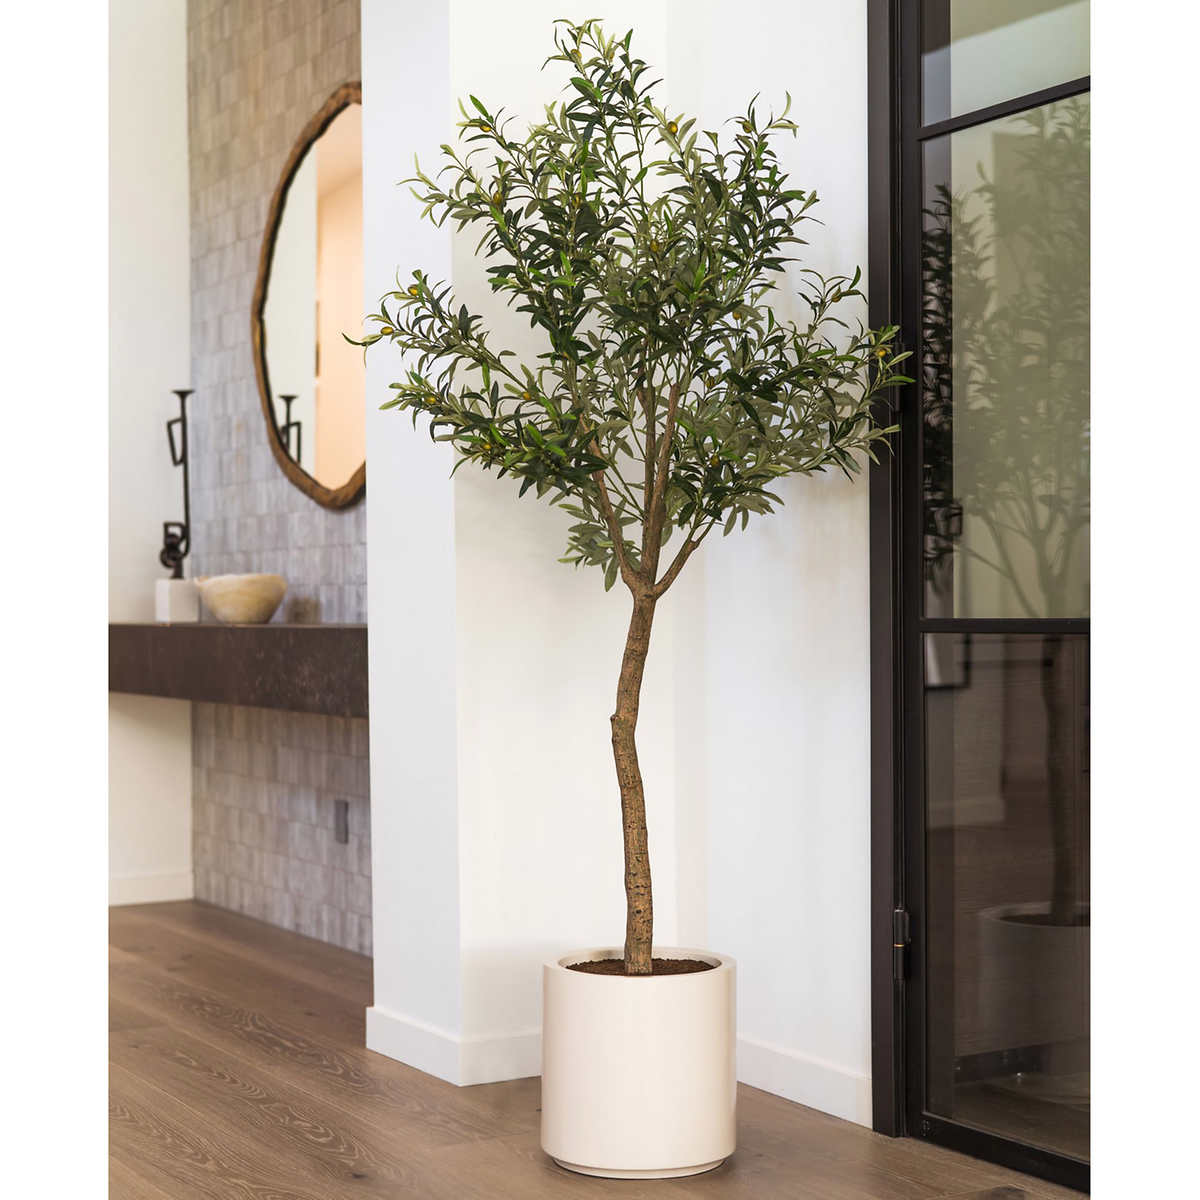 Indoor Olive Tree For sale: Full Care Guide & Plant Insights